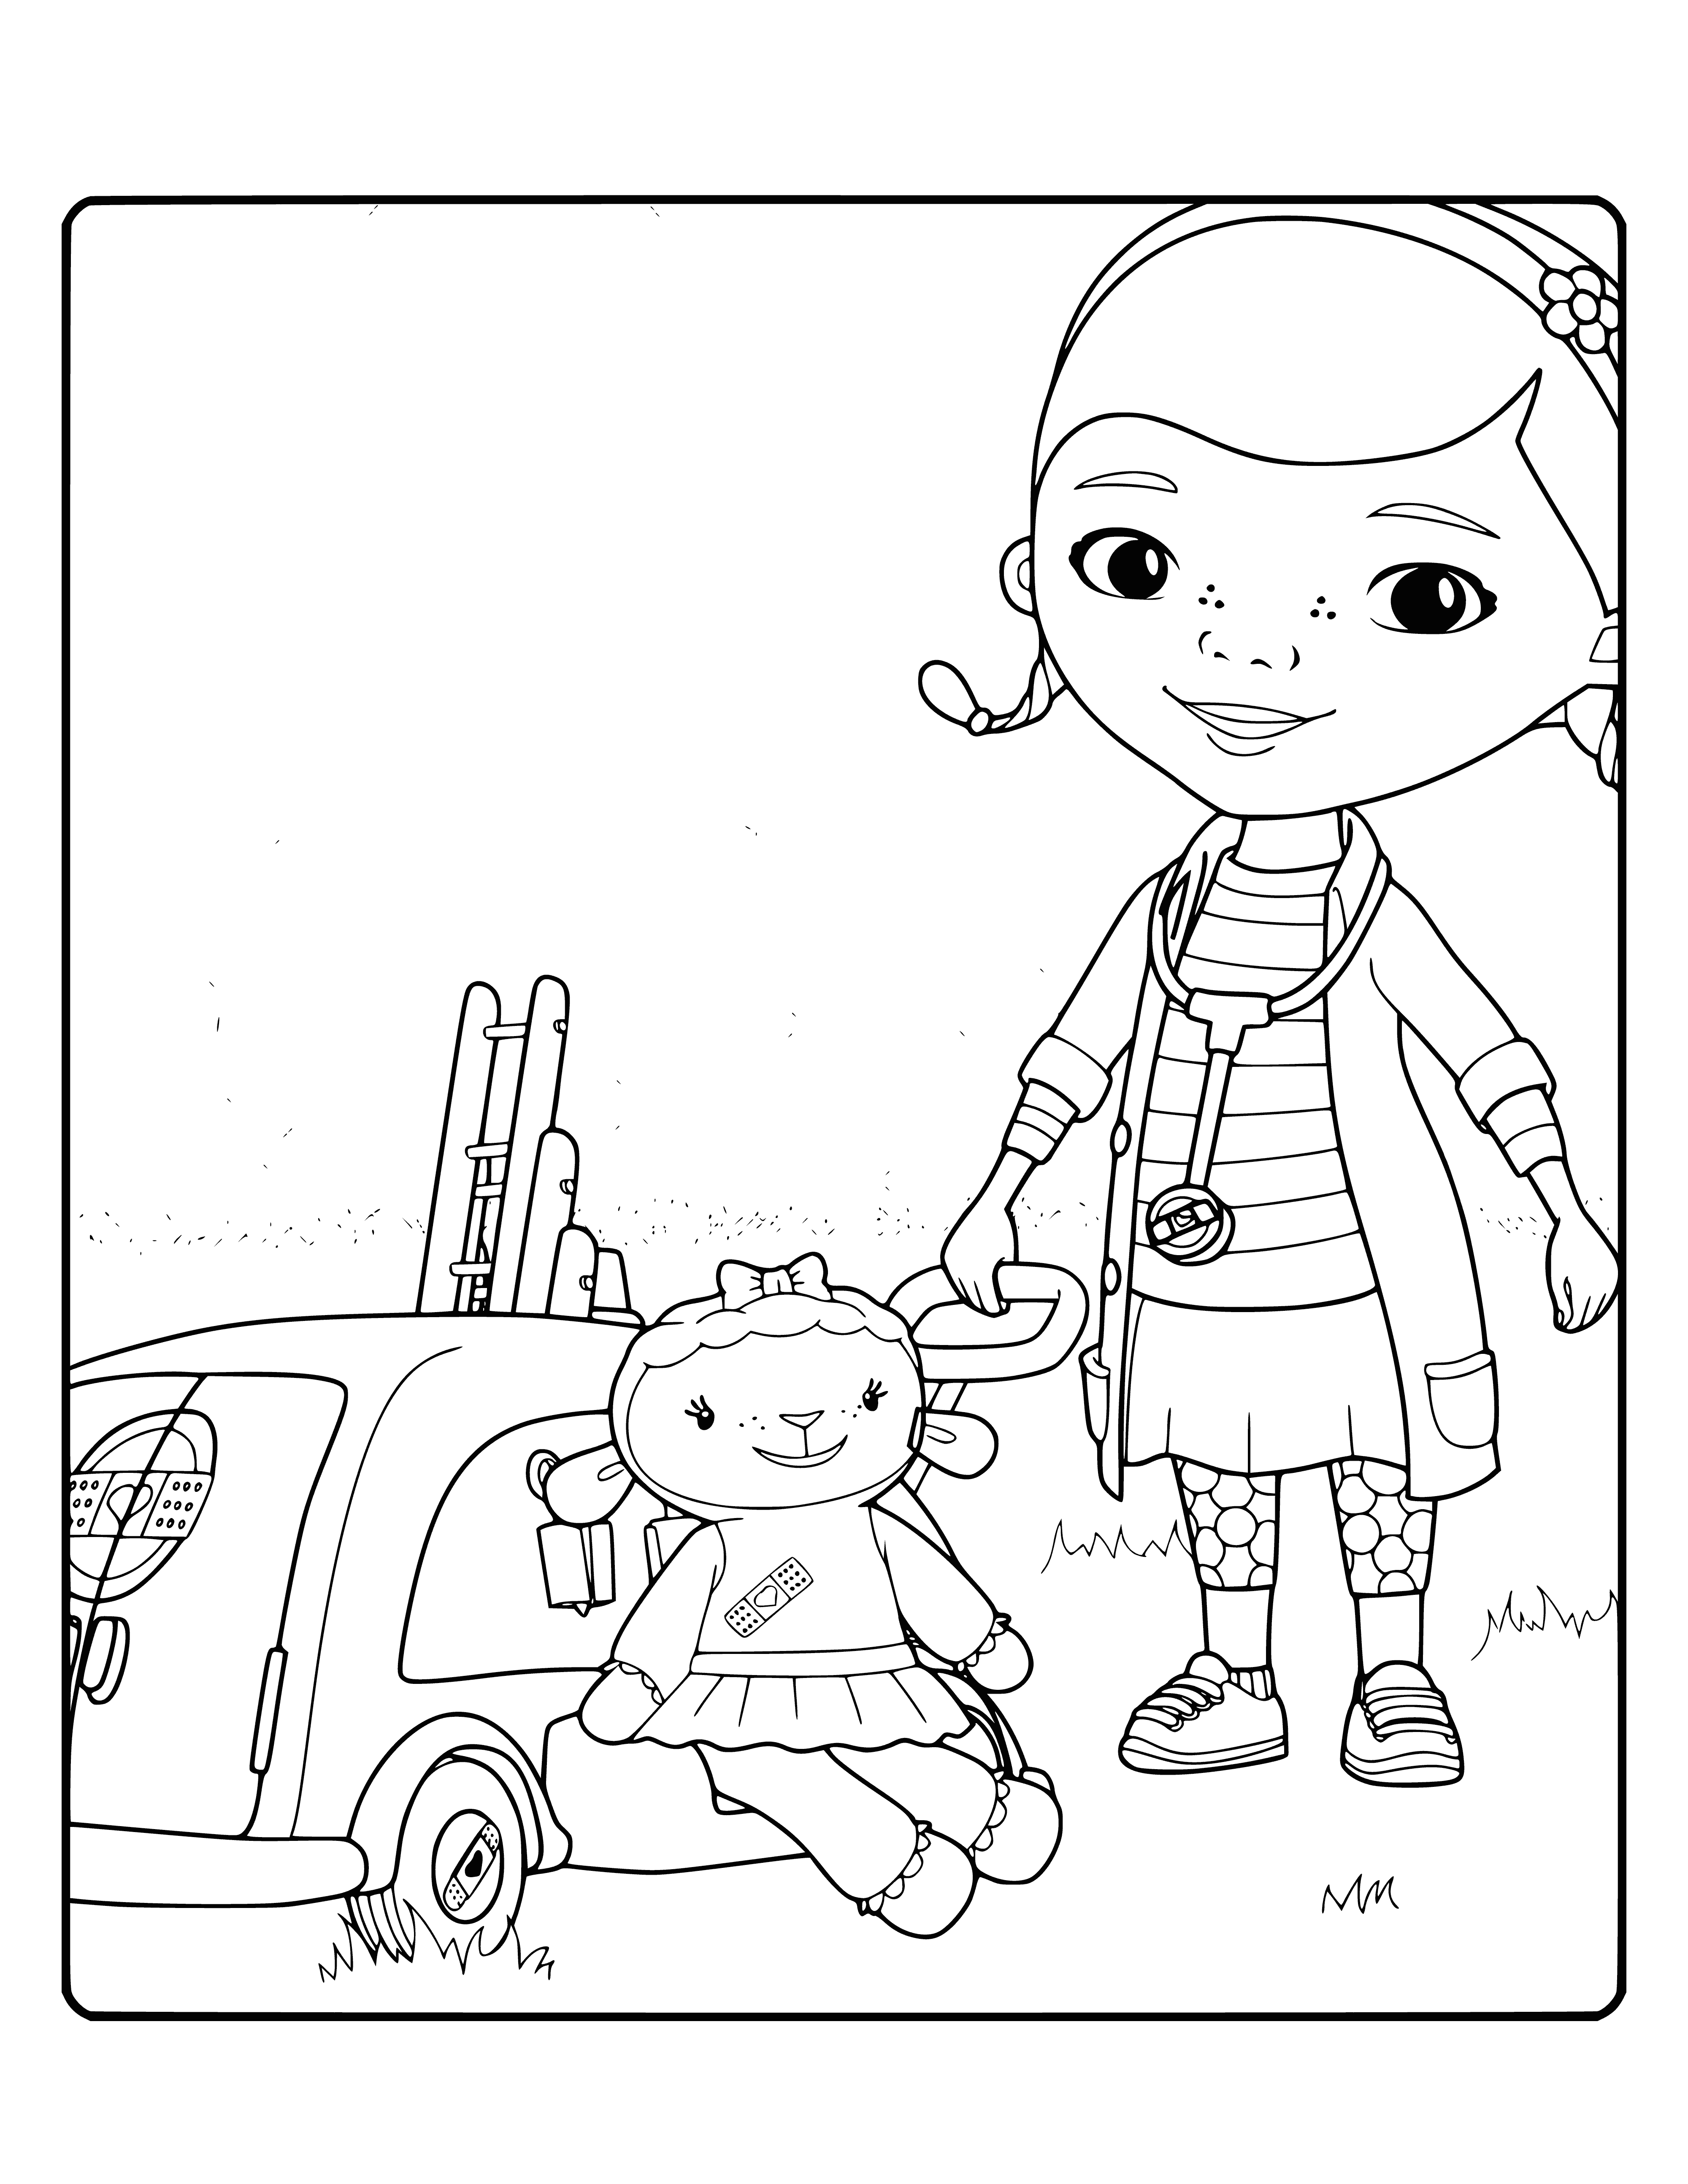 Dotty and Lammy coloring page